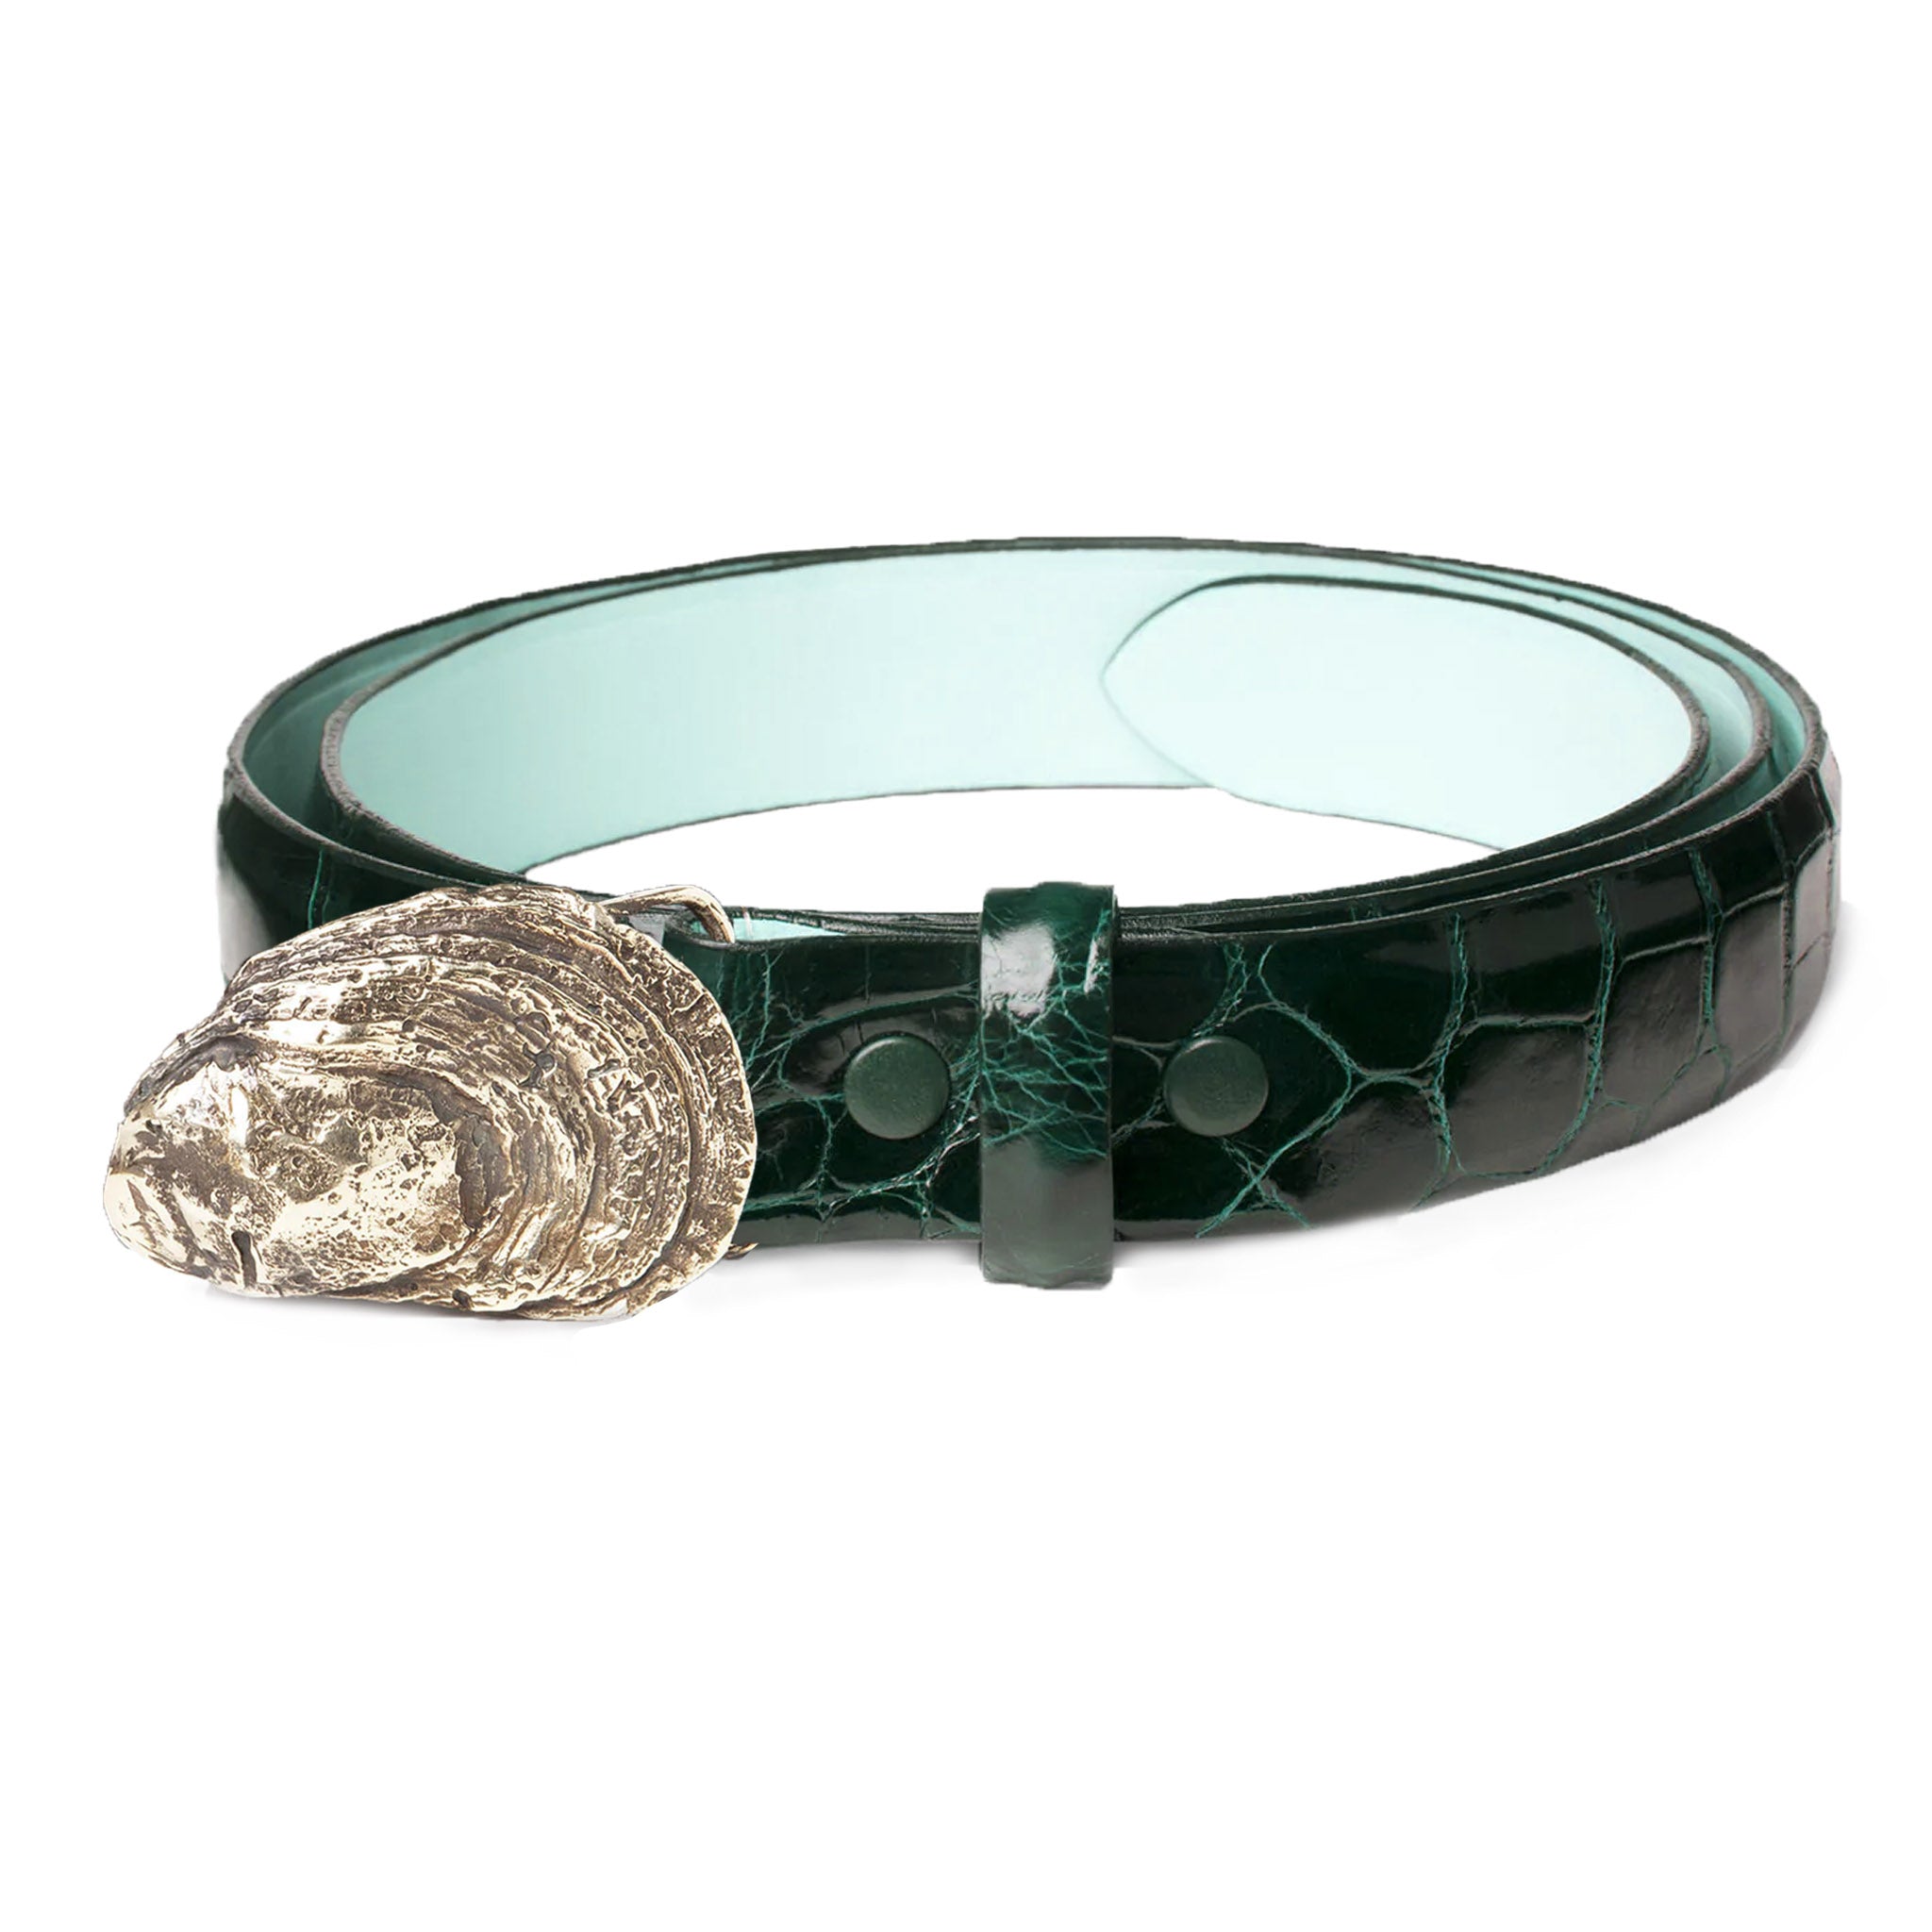 Oyster Shell Buckle with Glazed Forest Green Alligator Belt